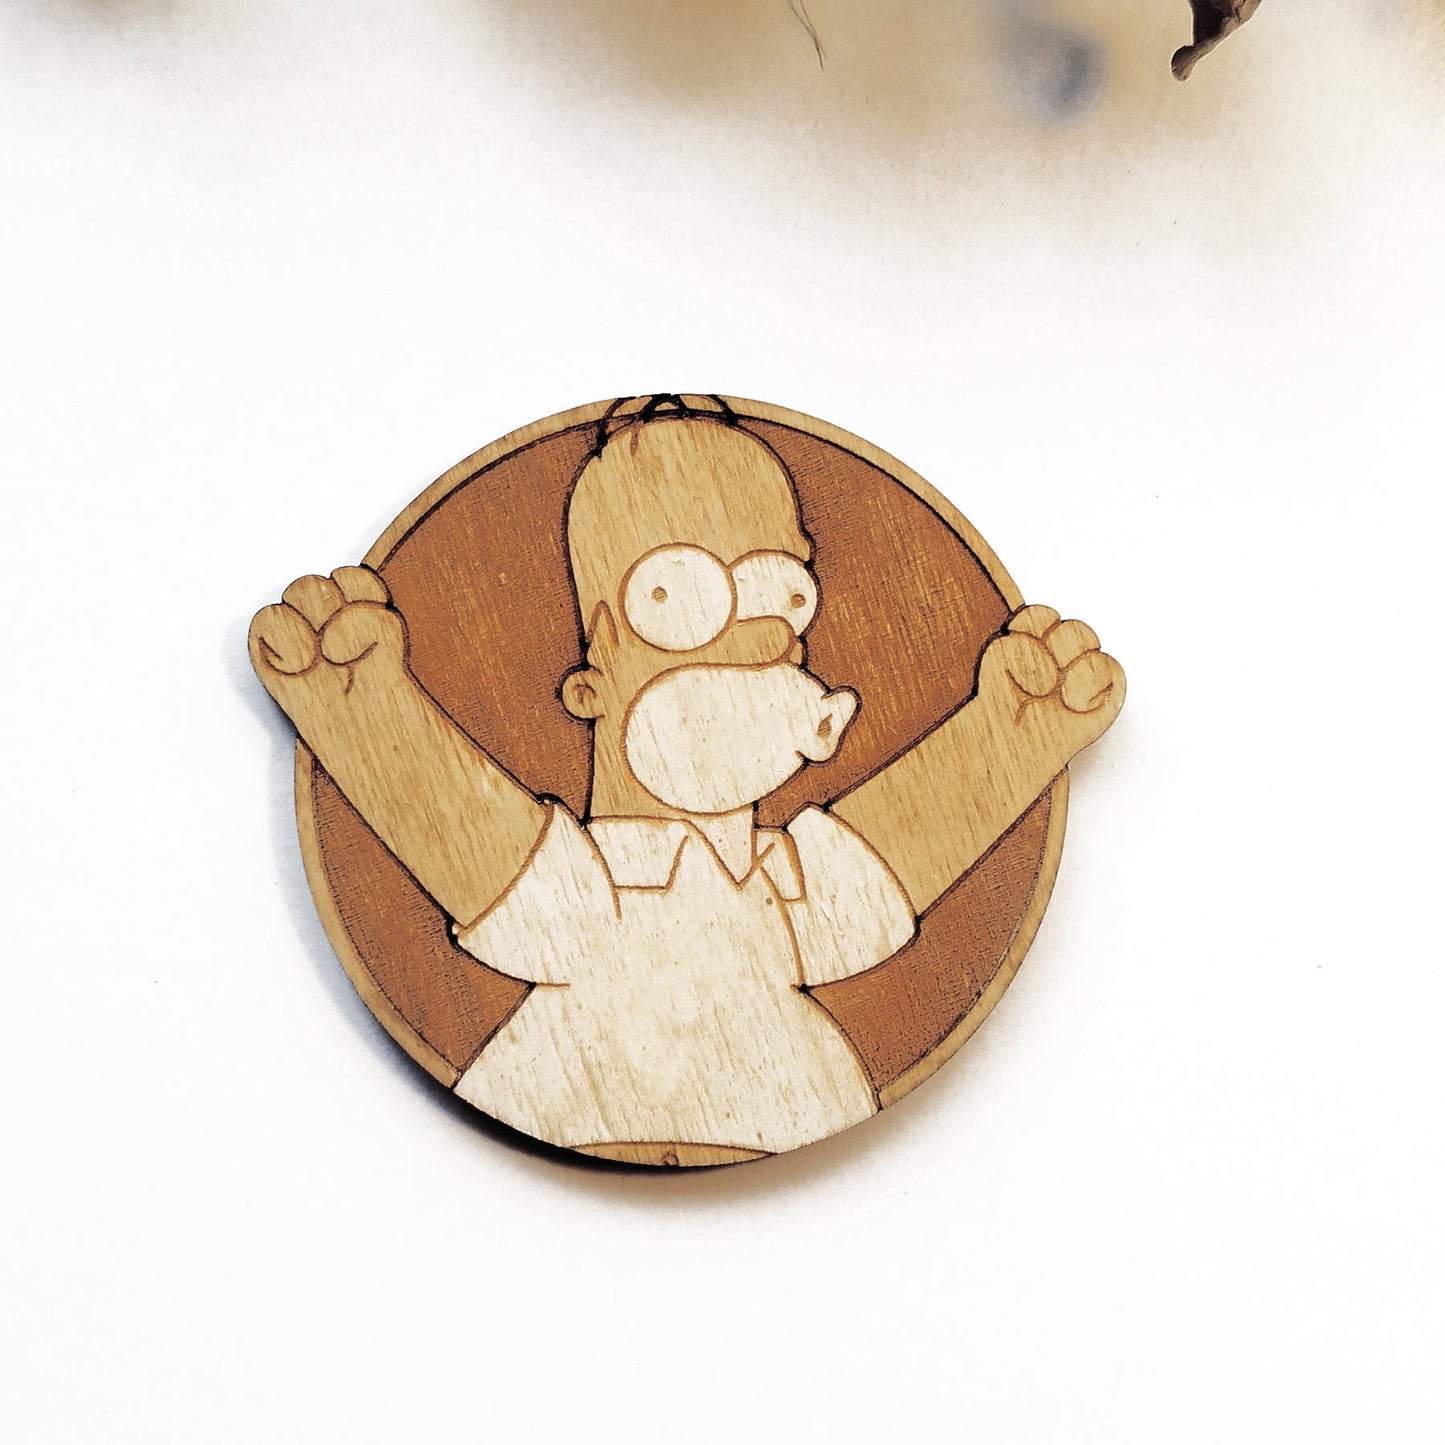 Set of 6 The Simpsons Wooden Coasters - Handmade Gift - Housewarming - Wood Kitchenware-3